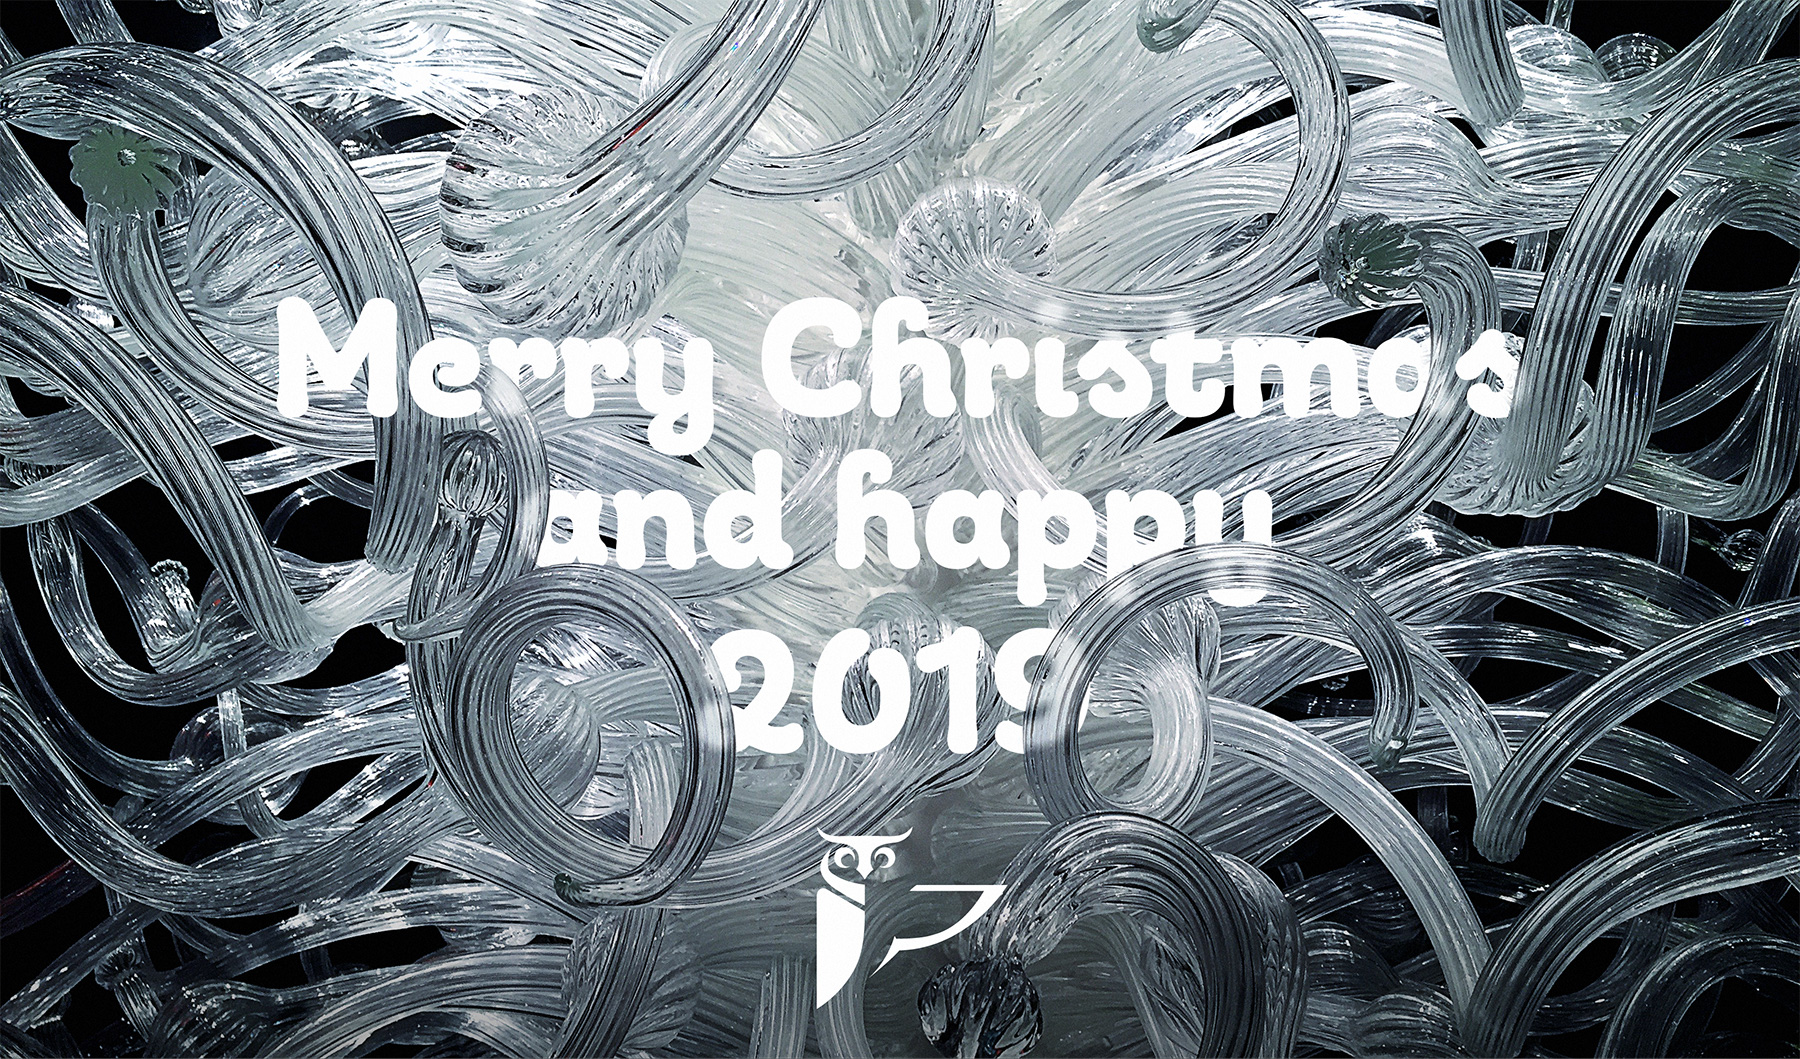 MERRY CHRISTMAS AND HAPPY 2019!